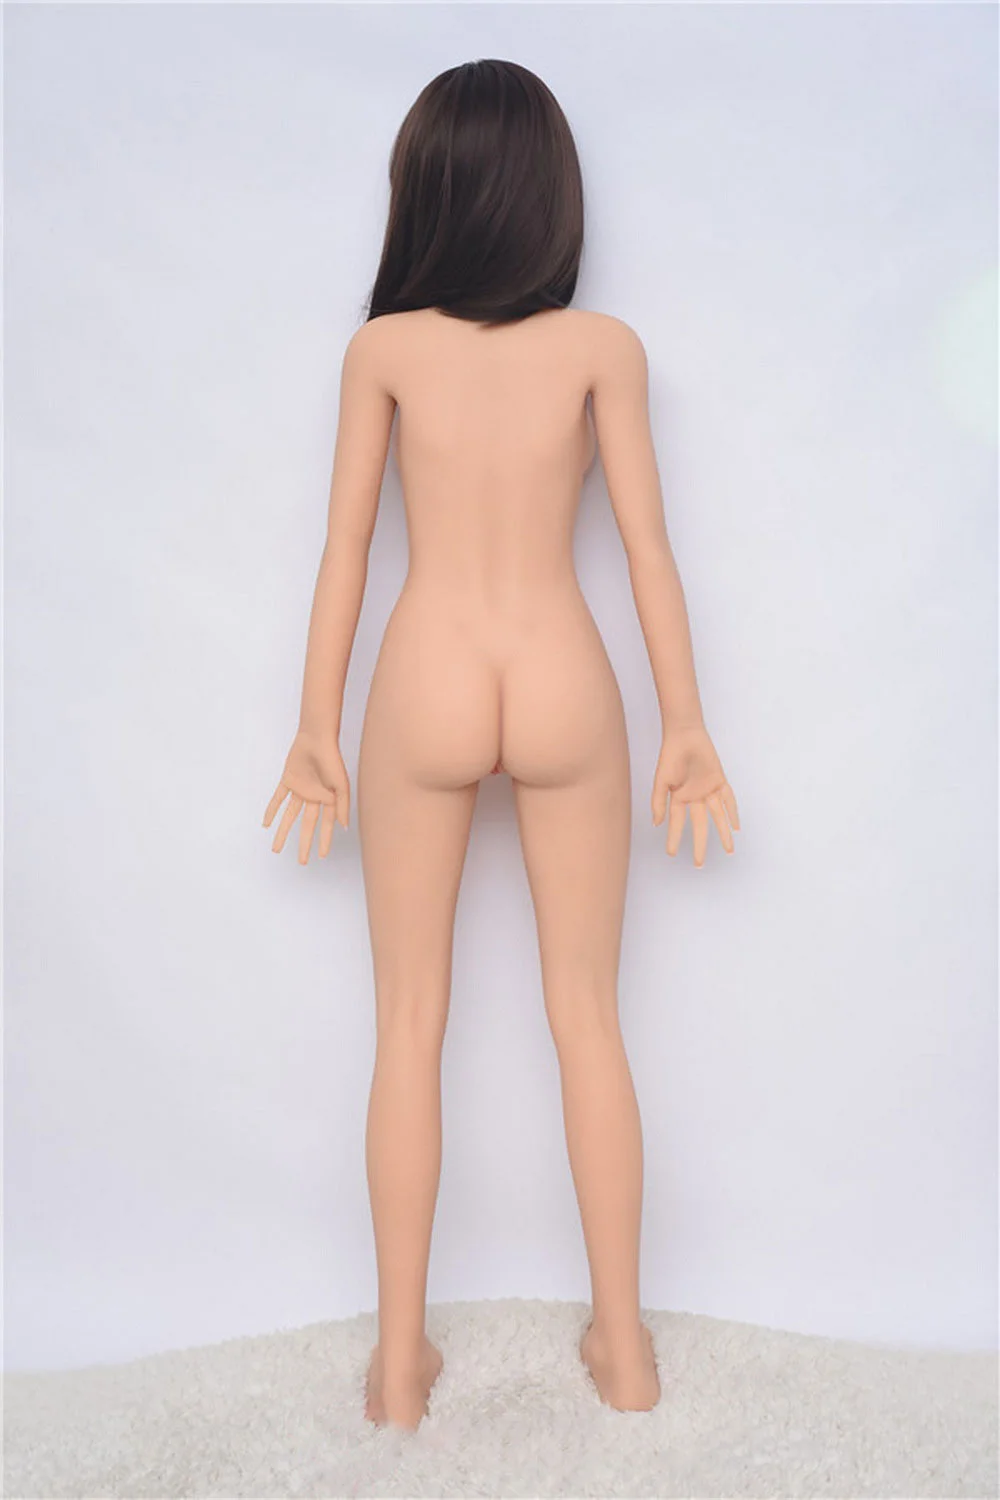 A sex doll with a naked body facing the wall